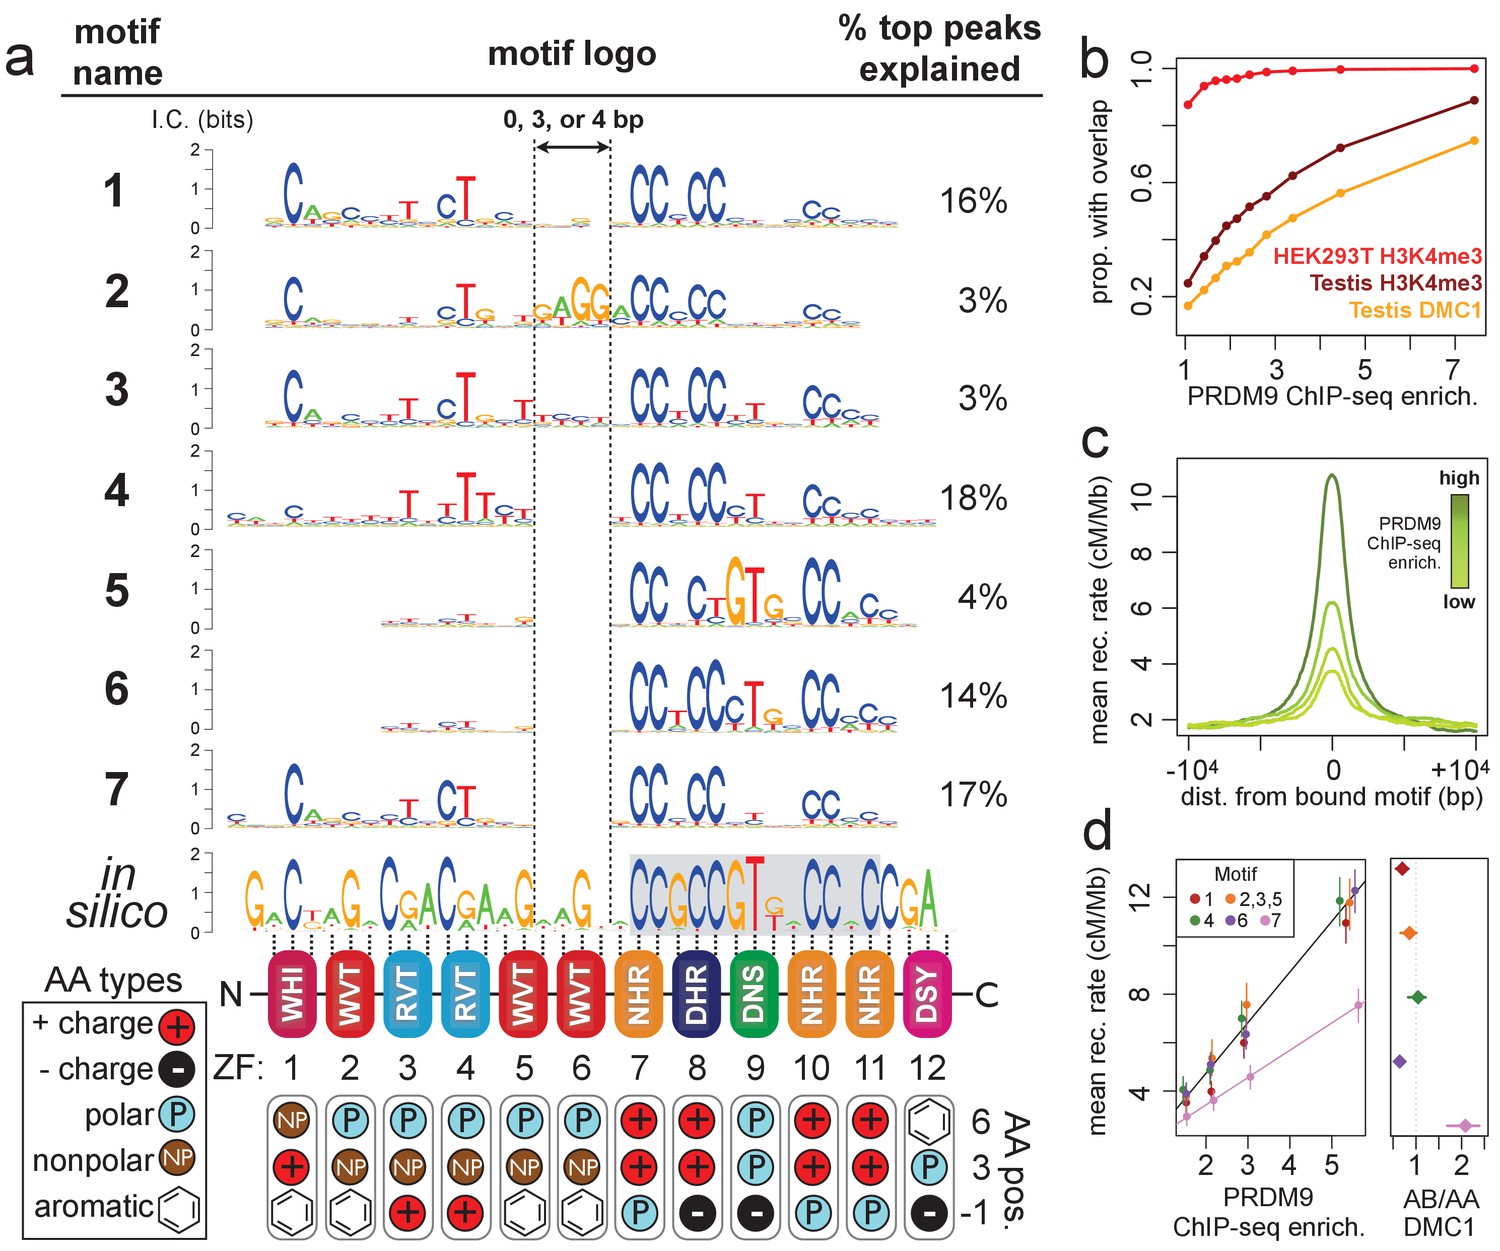 Conserved sequence beyond known TF binding regions. PATSER 